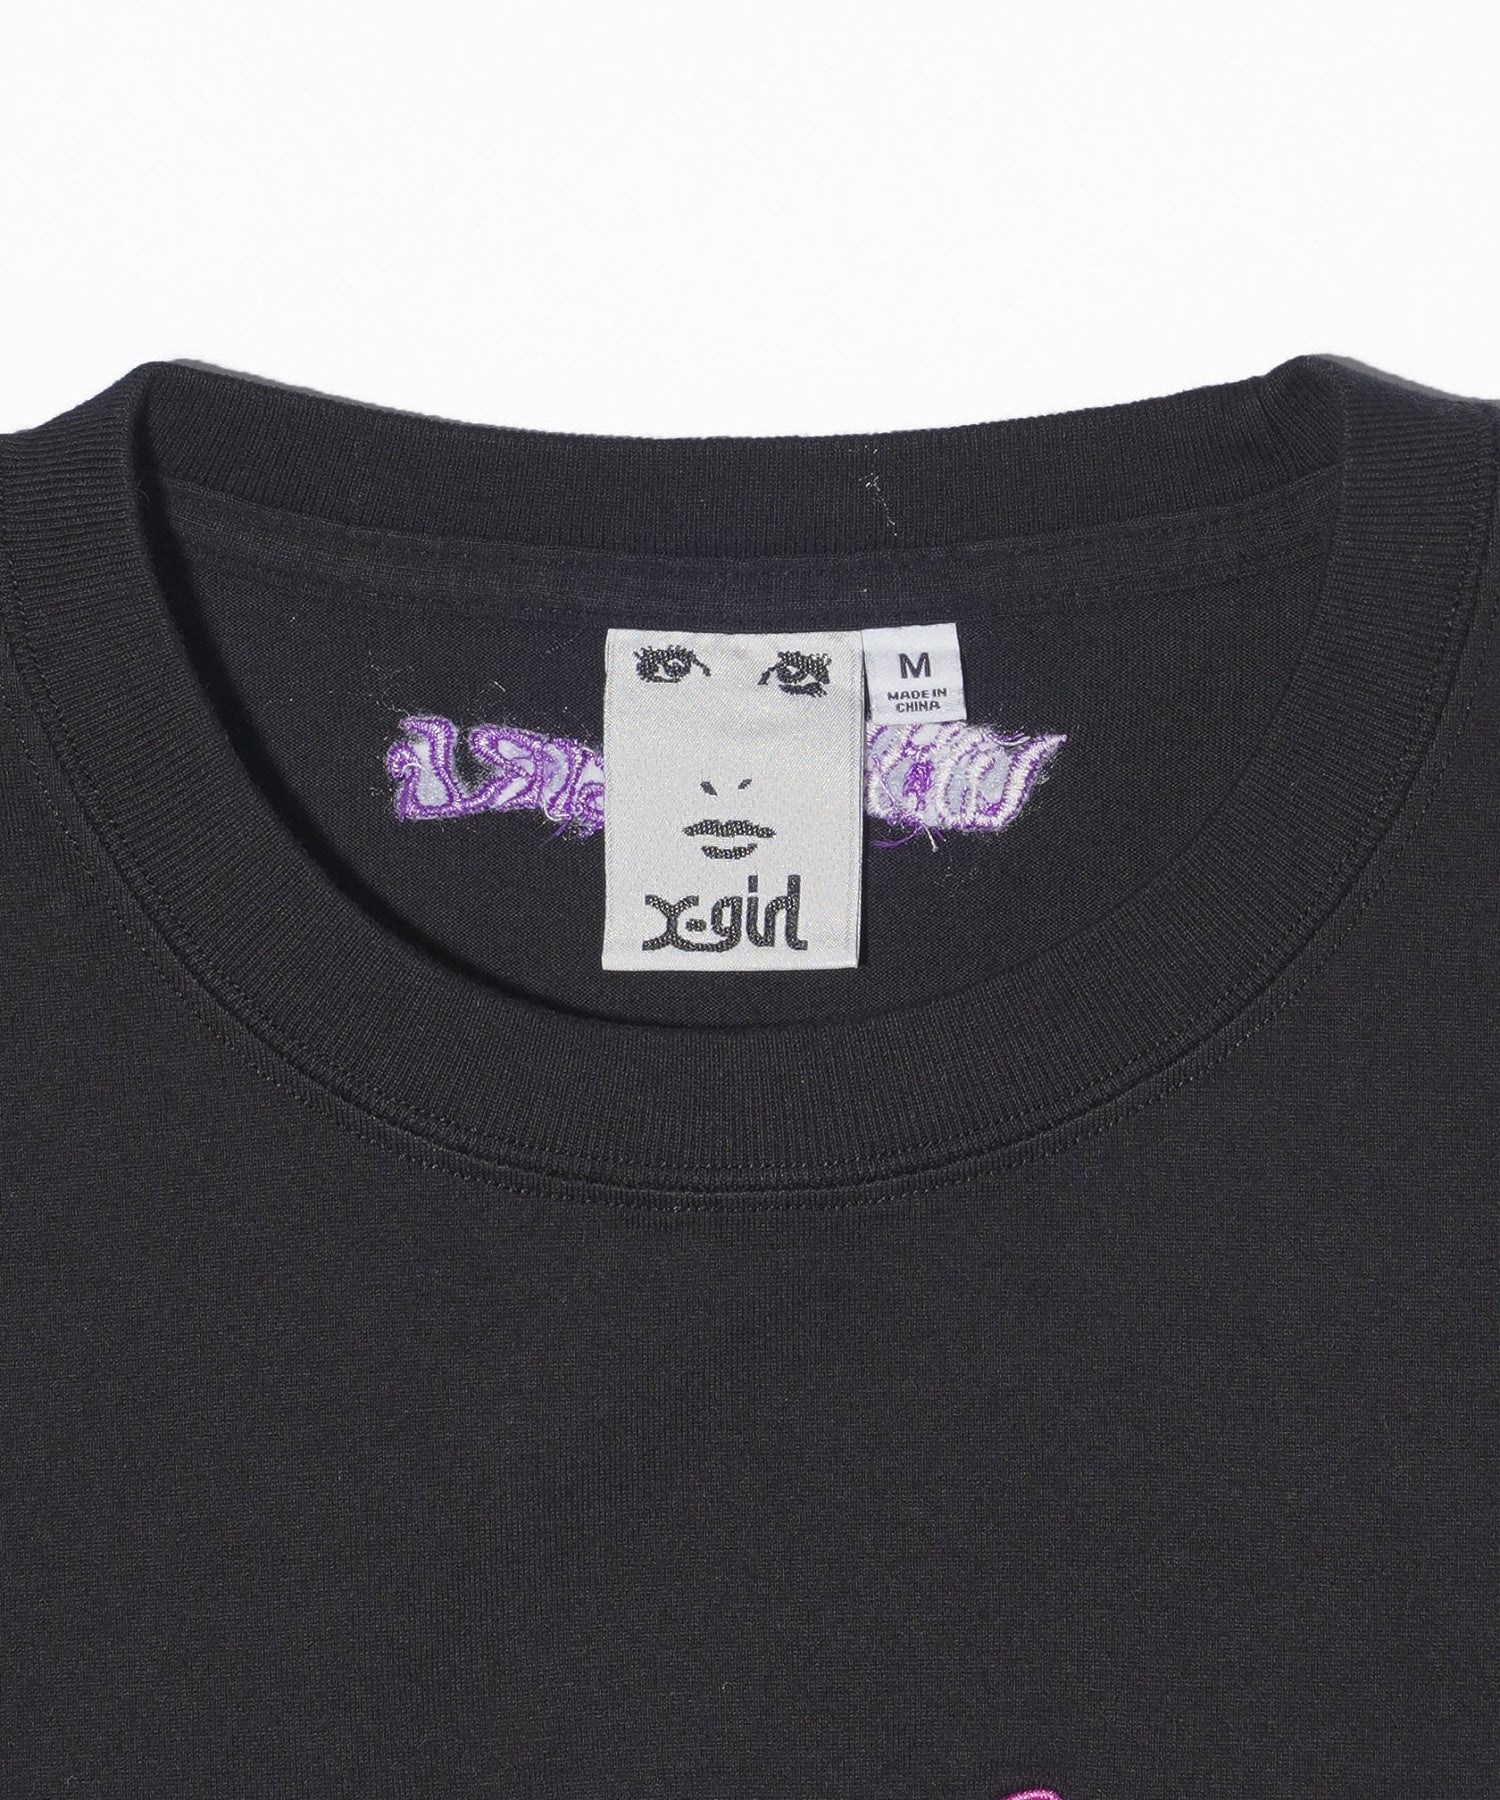 EMBROIDERED BUTTERFLY LOGO S/S BABY TEE